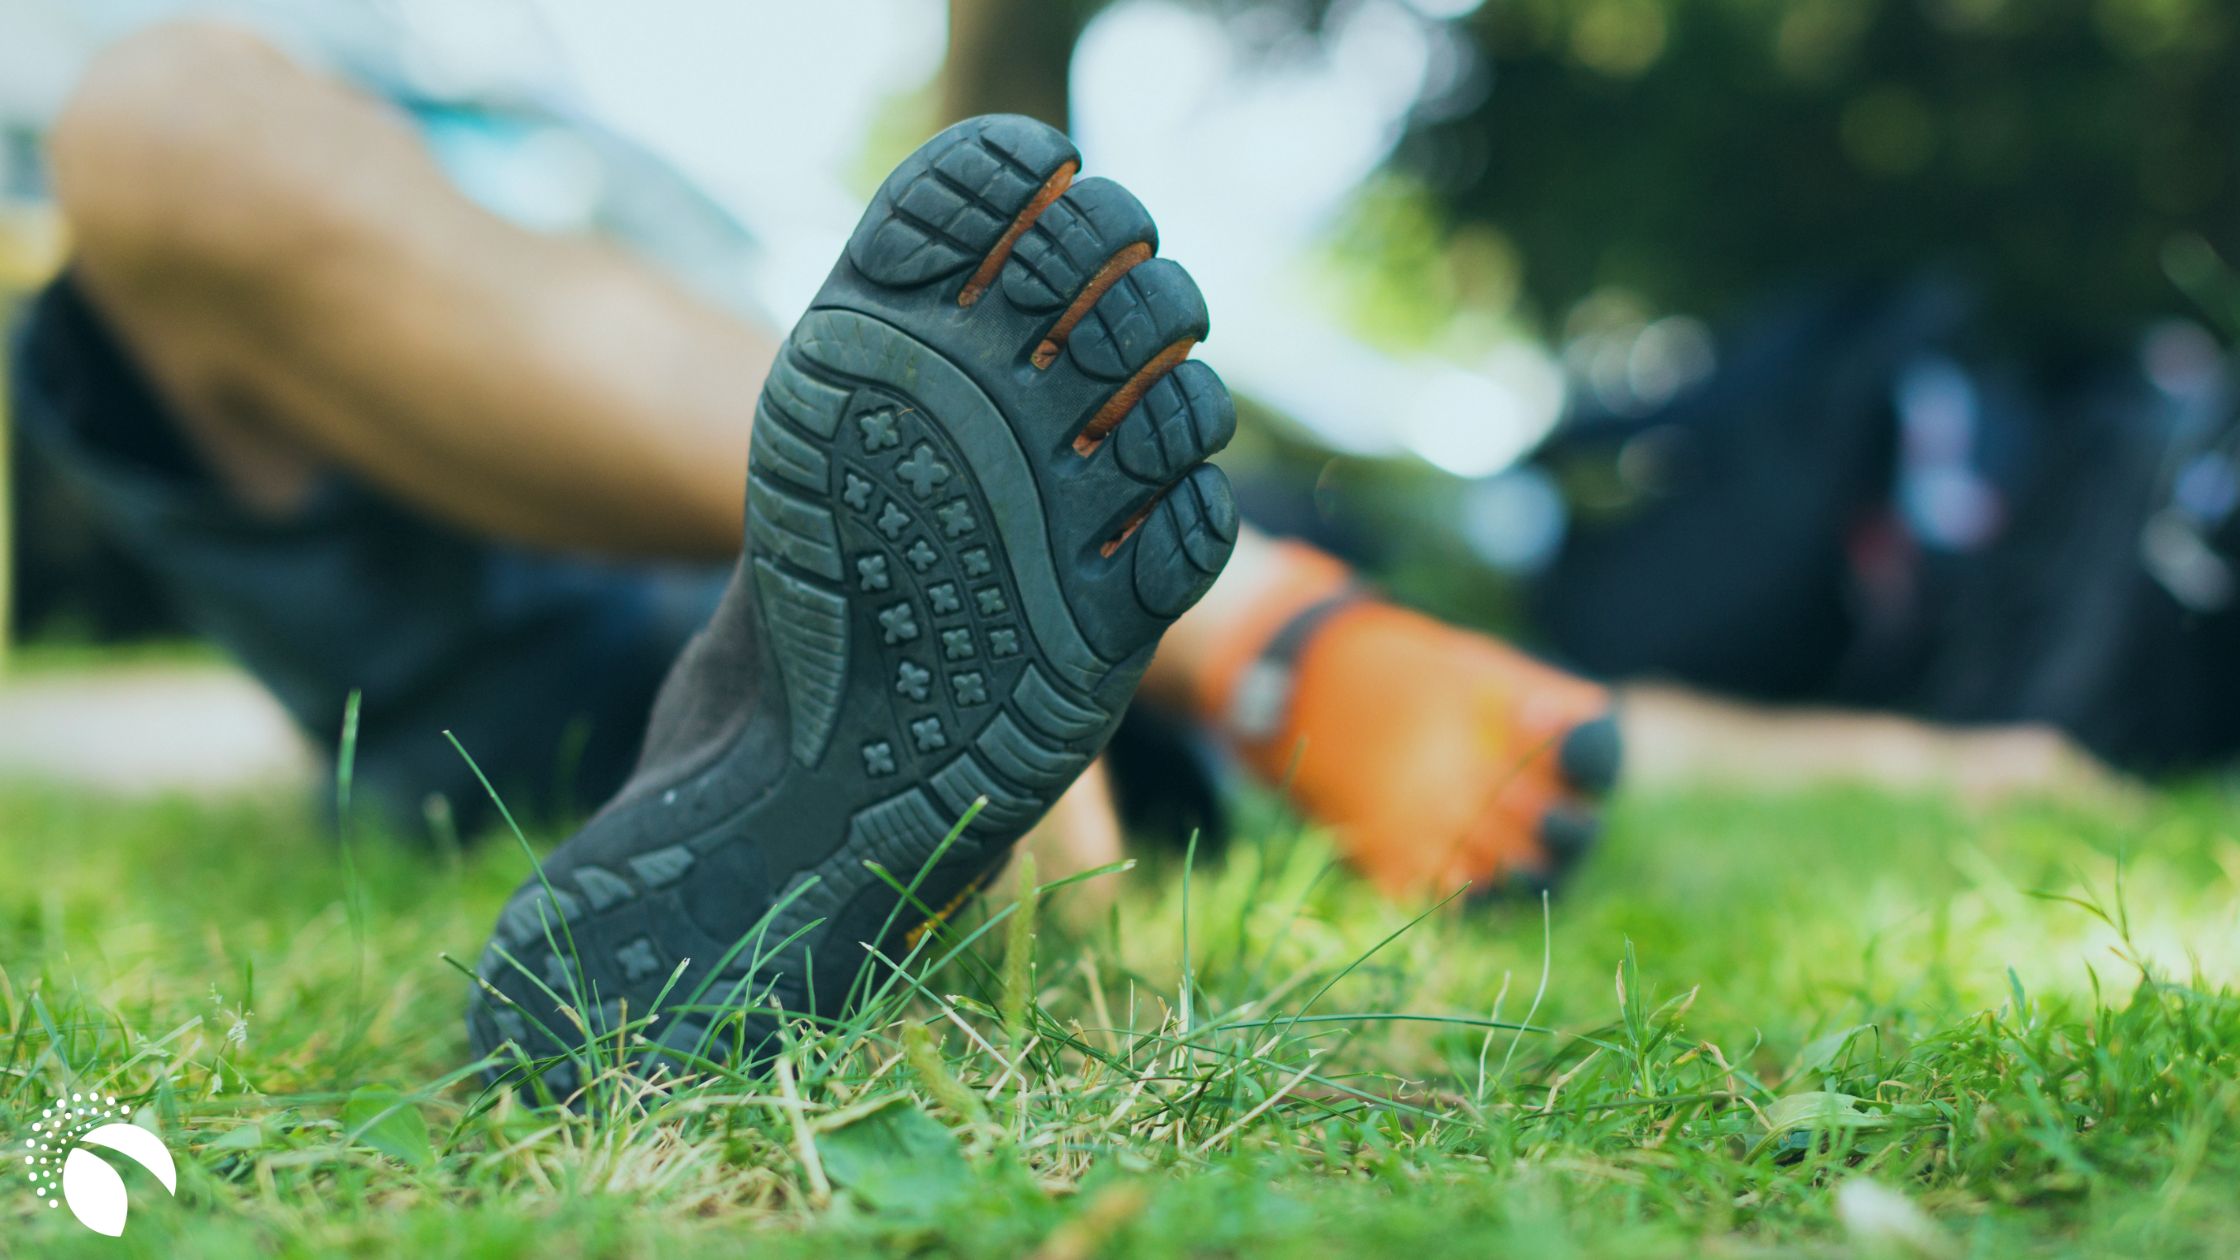 How long does it take to transition to barefoot shoes? - Proactive